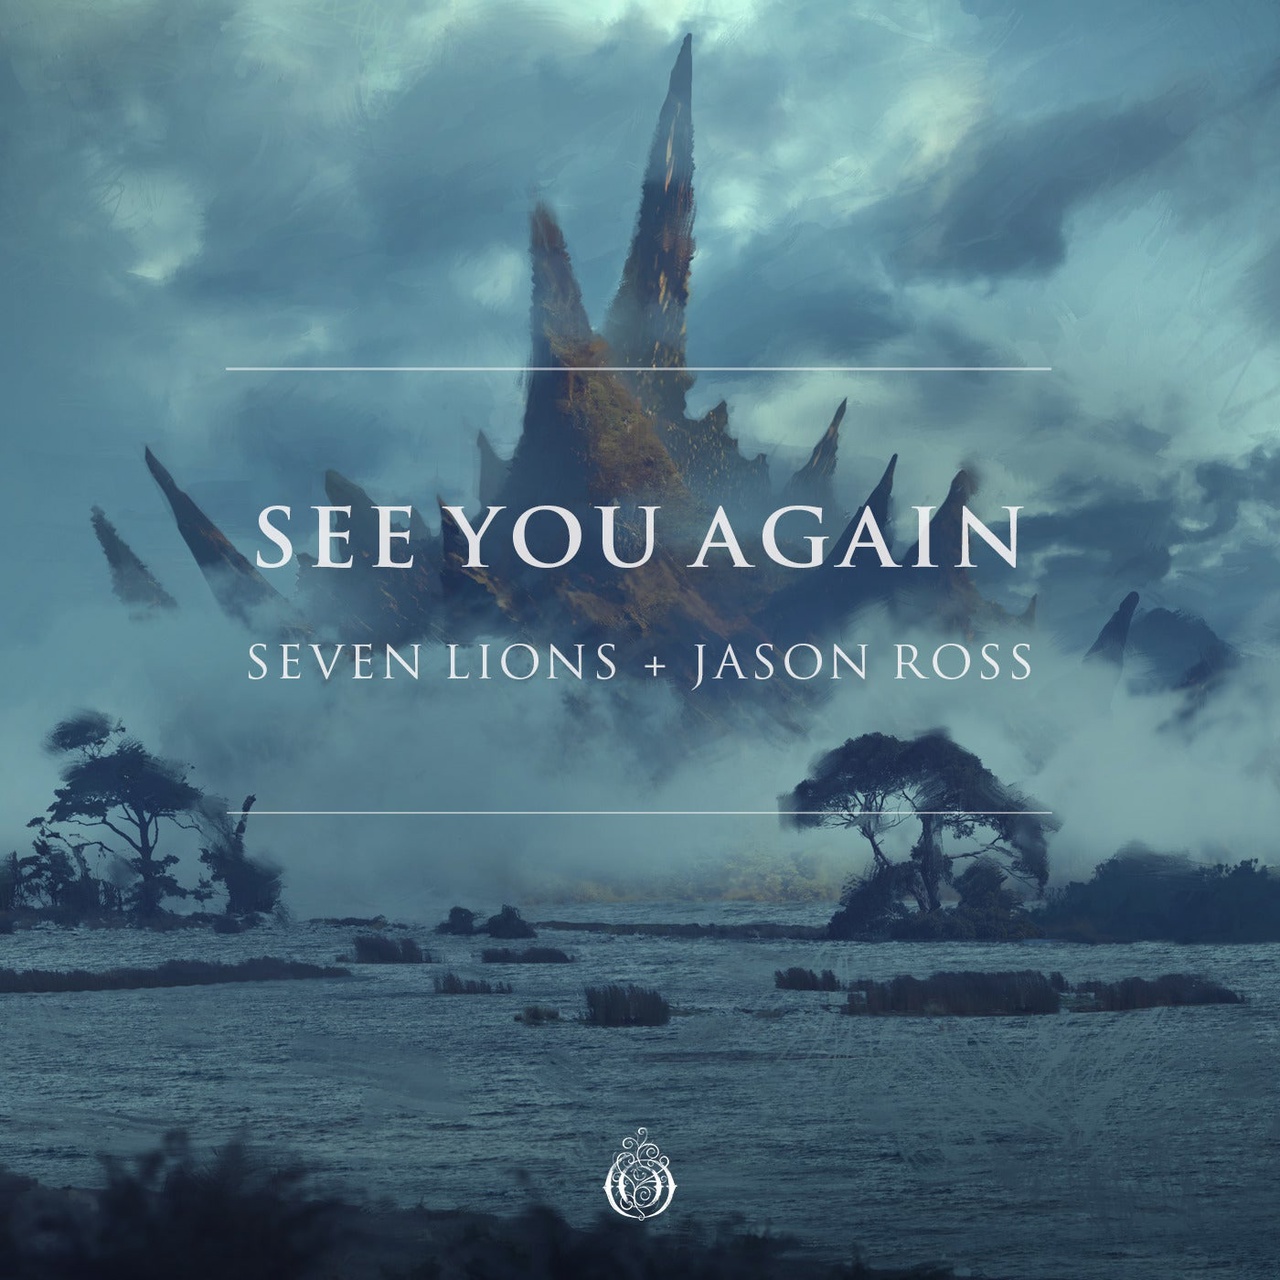 Seven Lions, Jason Ross, & Fiora See You Again cover artwork